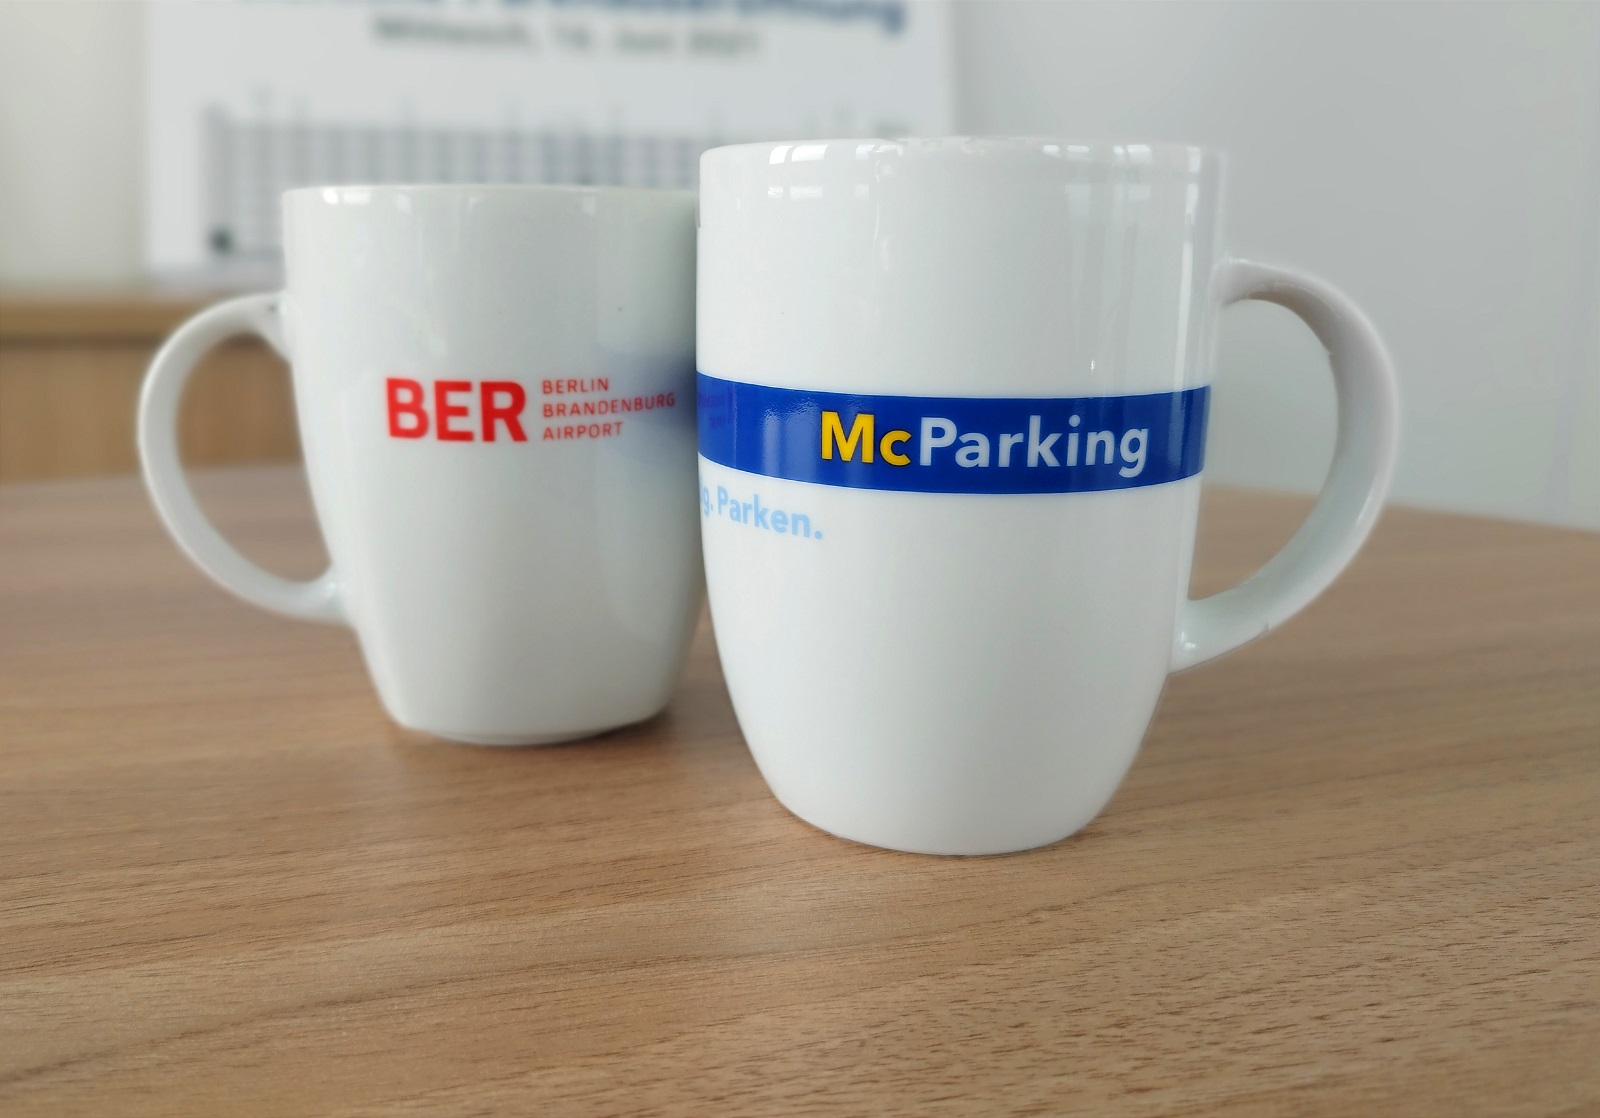 2 cups one with BER logo and one with McParking logo